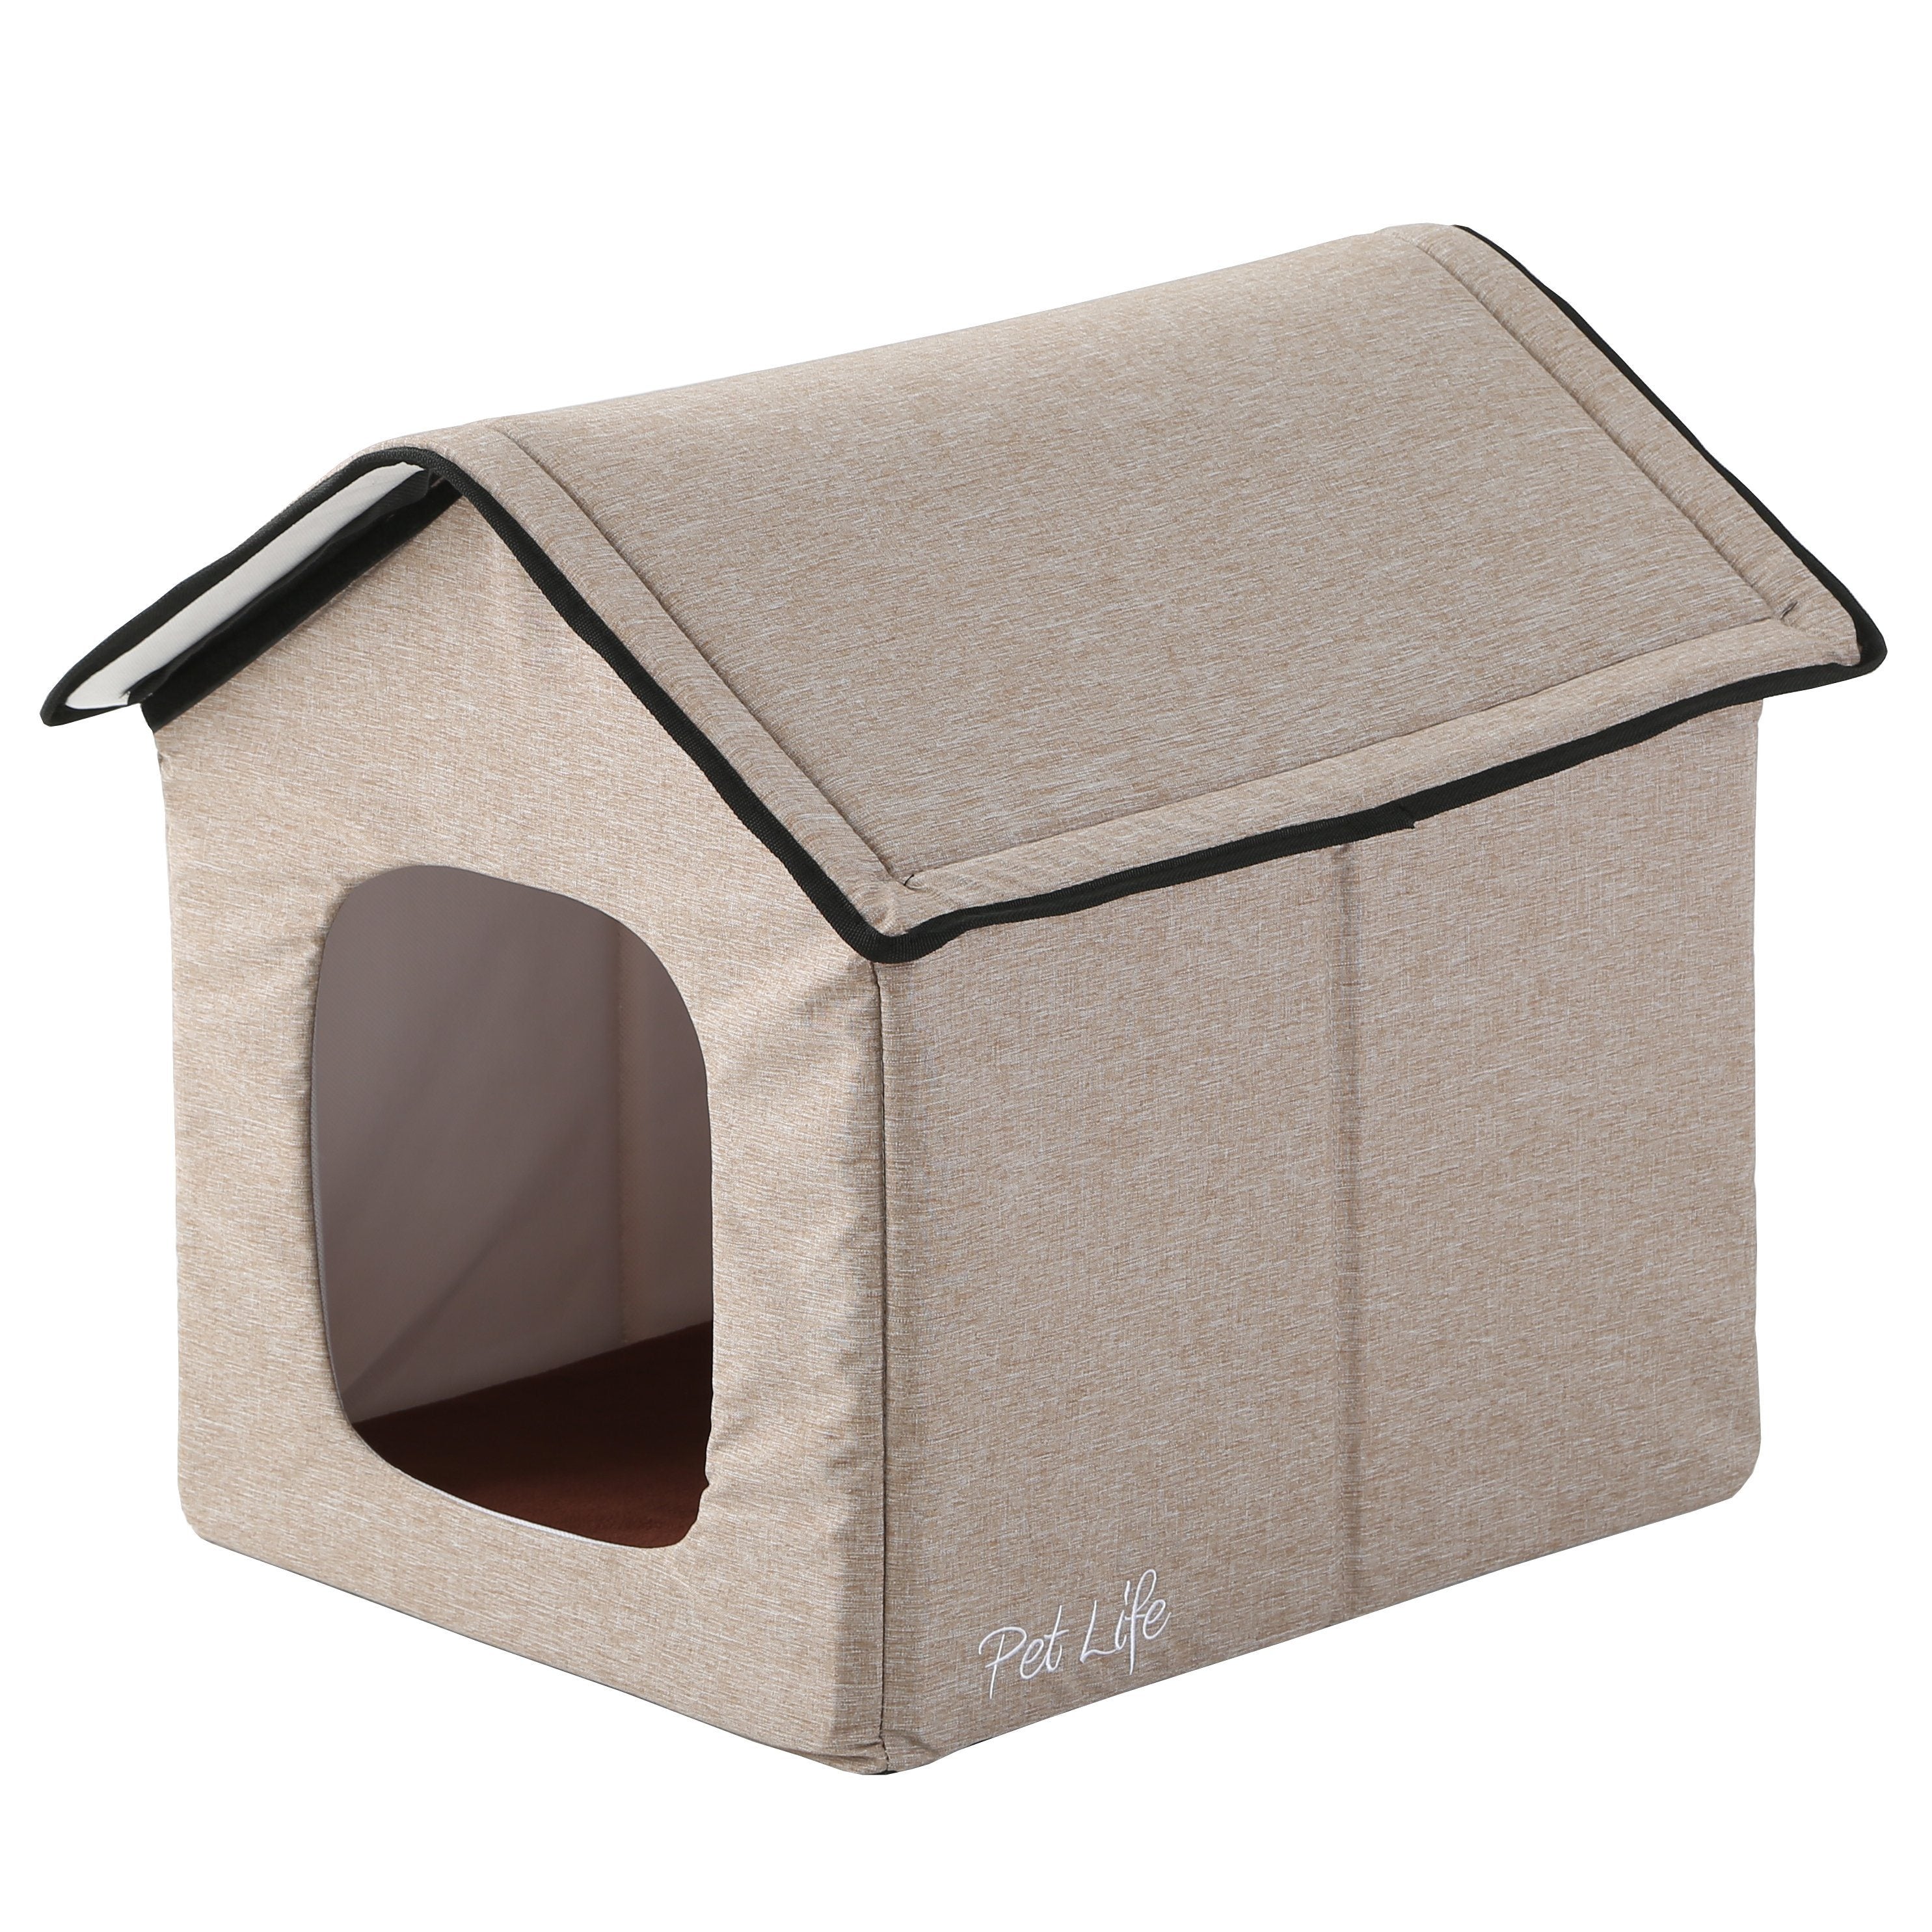 Pet Life 'Hush Puppy' Collapsible Electronic Heating and Cooling Smart Pet House Small Beige